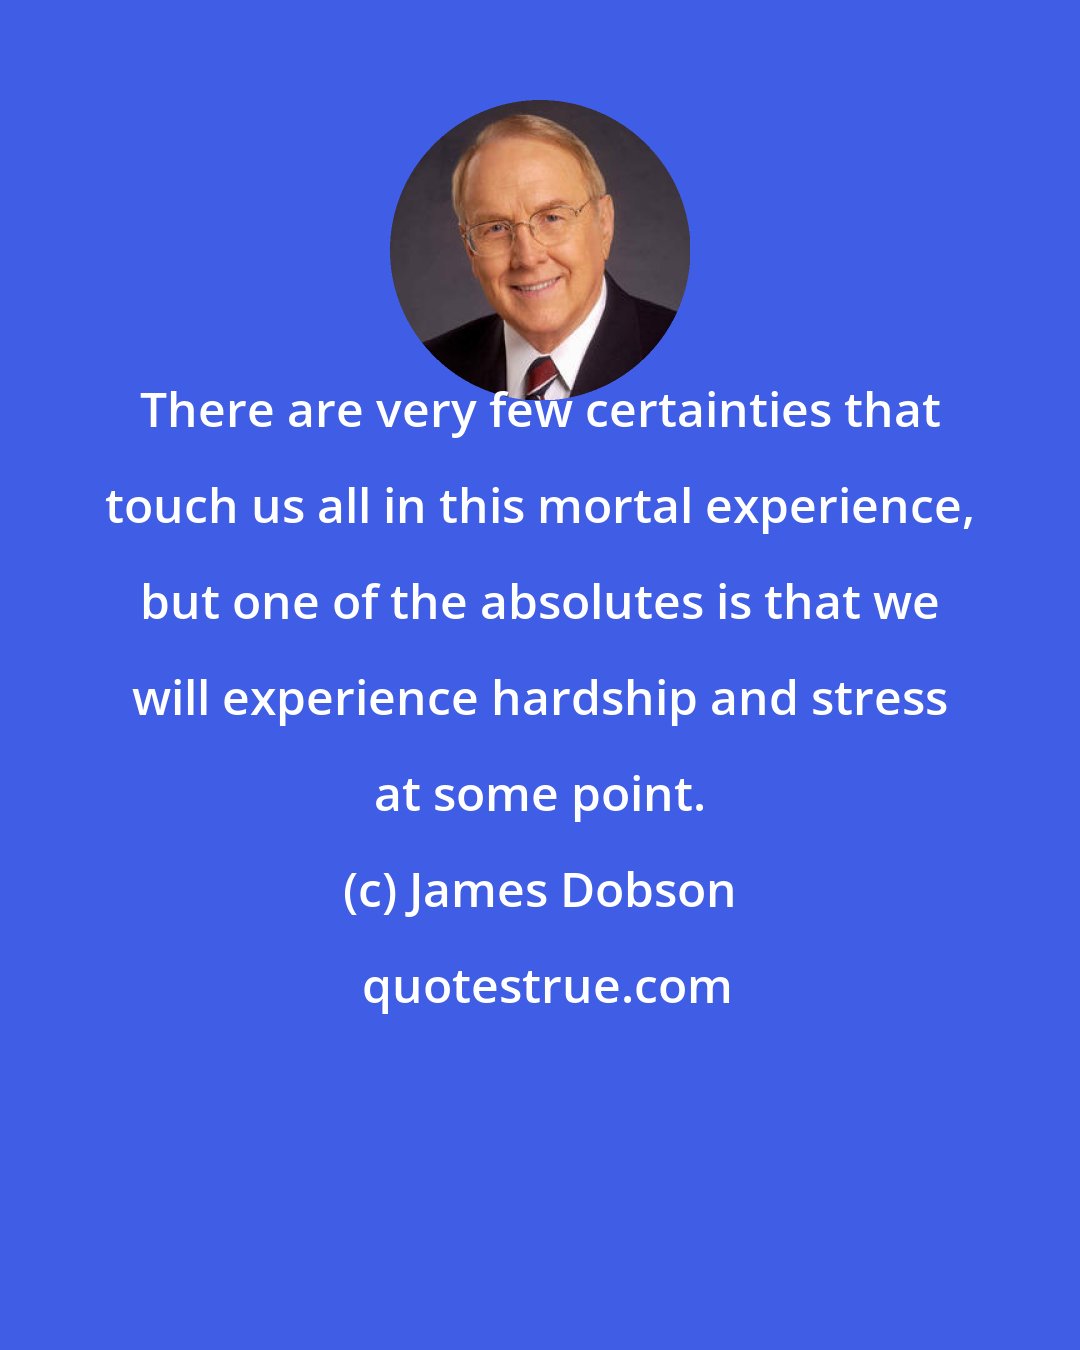 James Dobson: There are very few certainties that touch us all in this mortal experience, but one of the absolutes is that we will experience hardship and stress at some point.